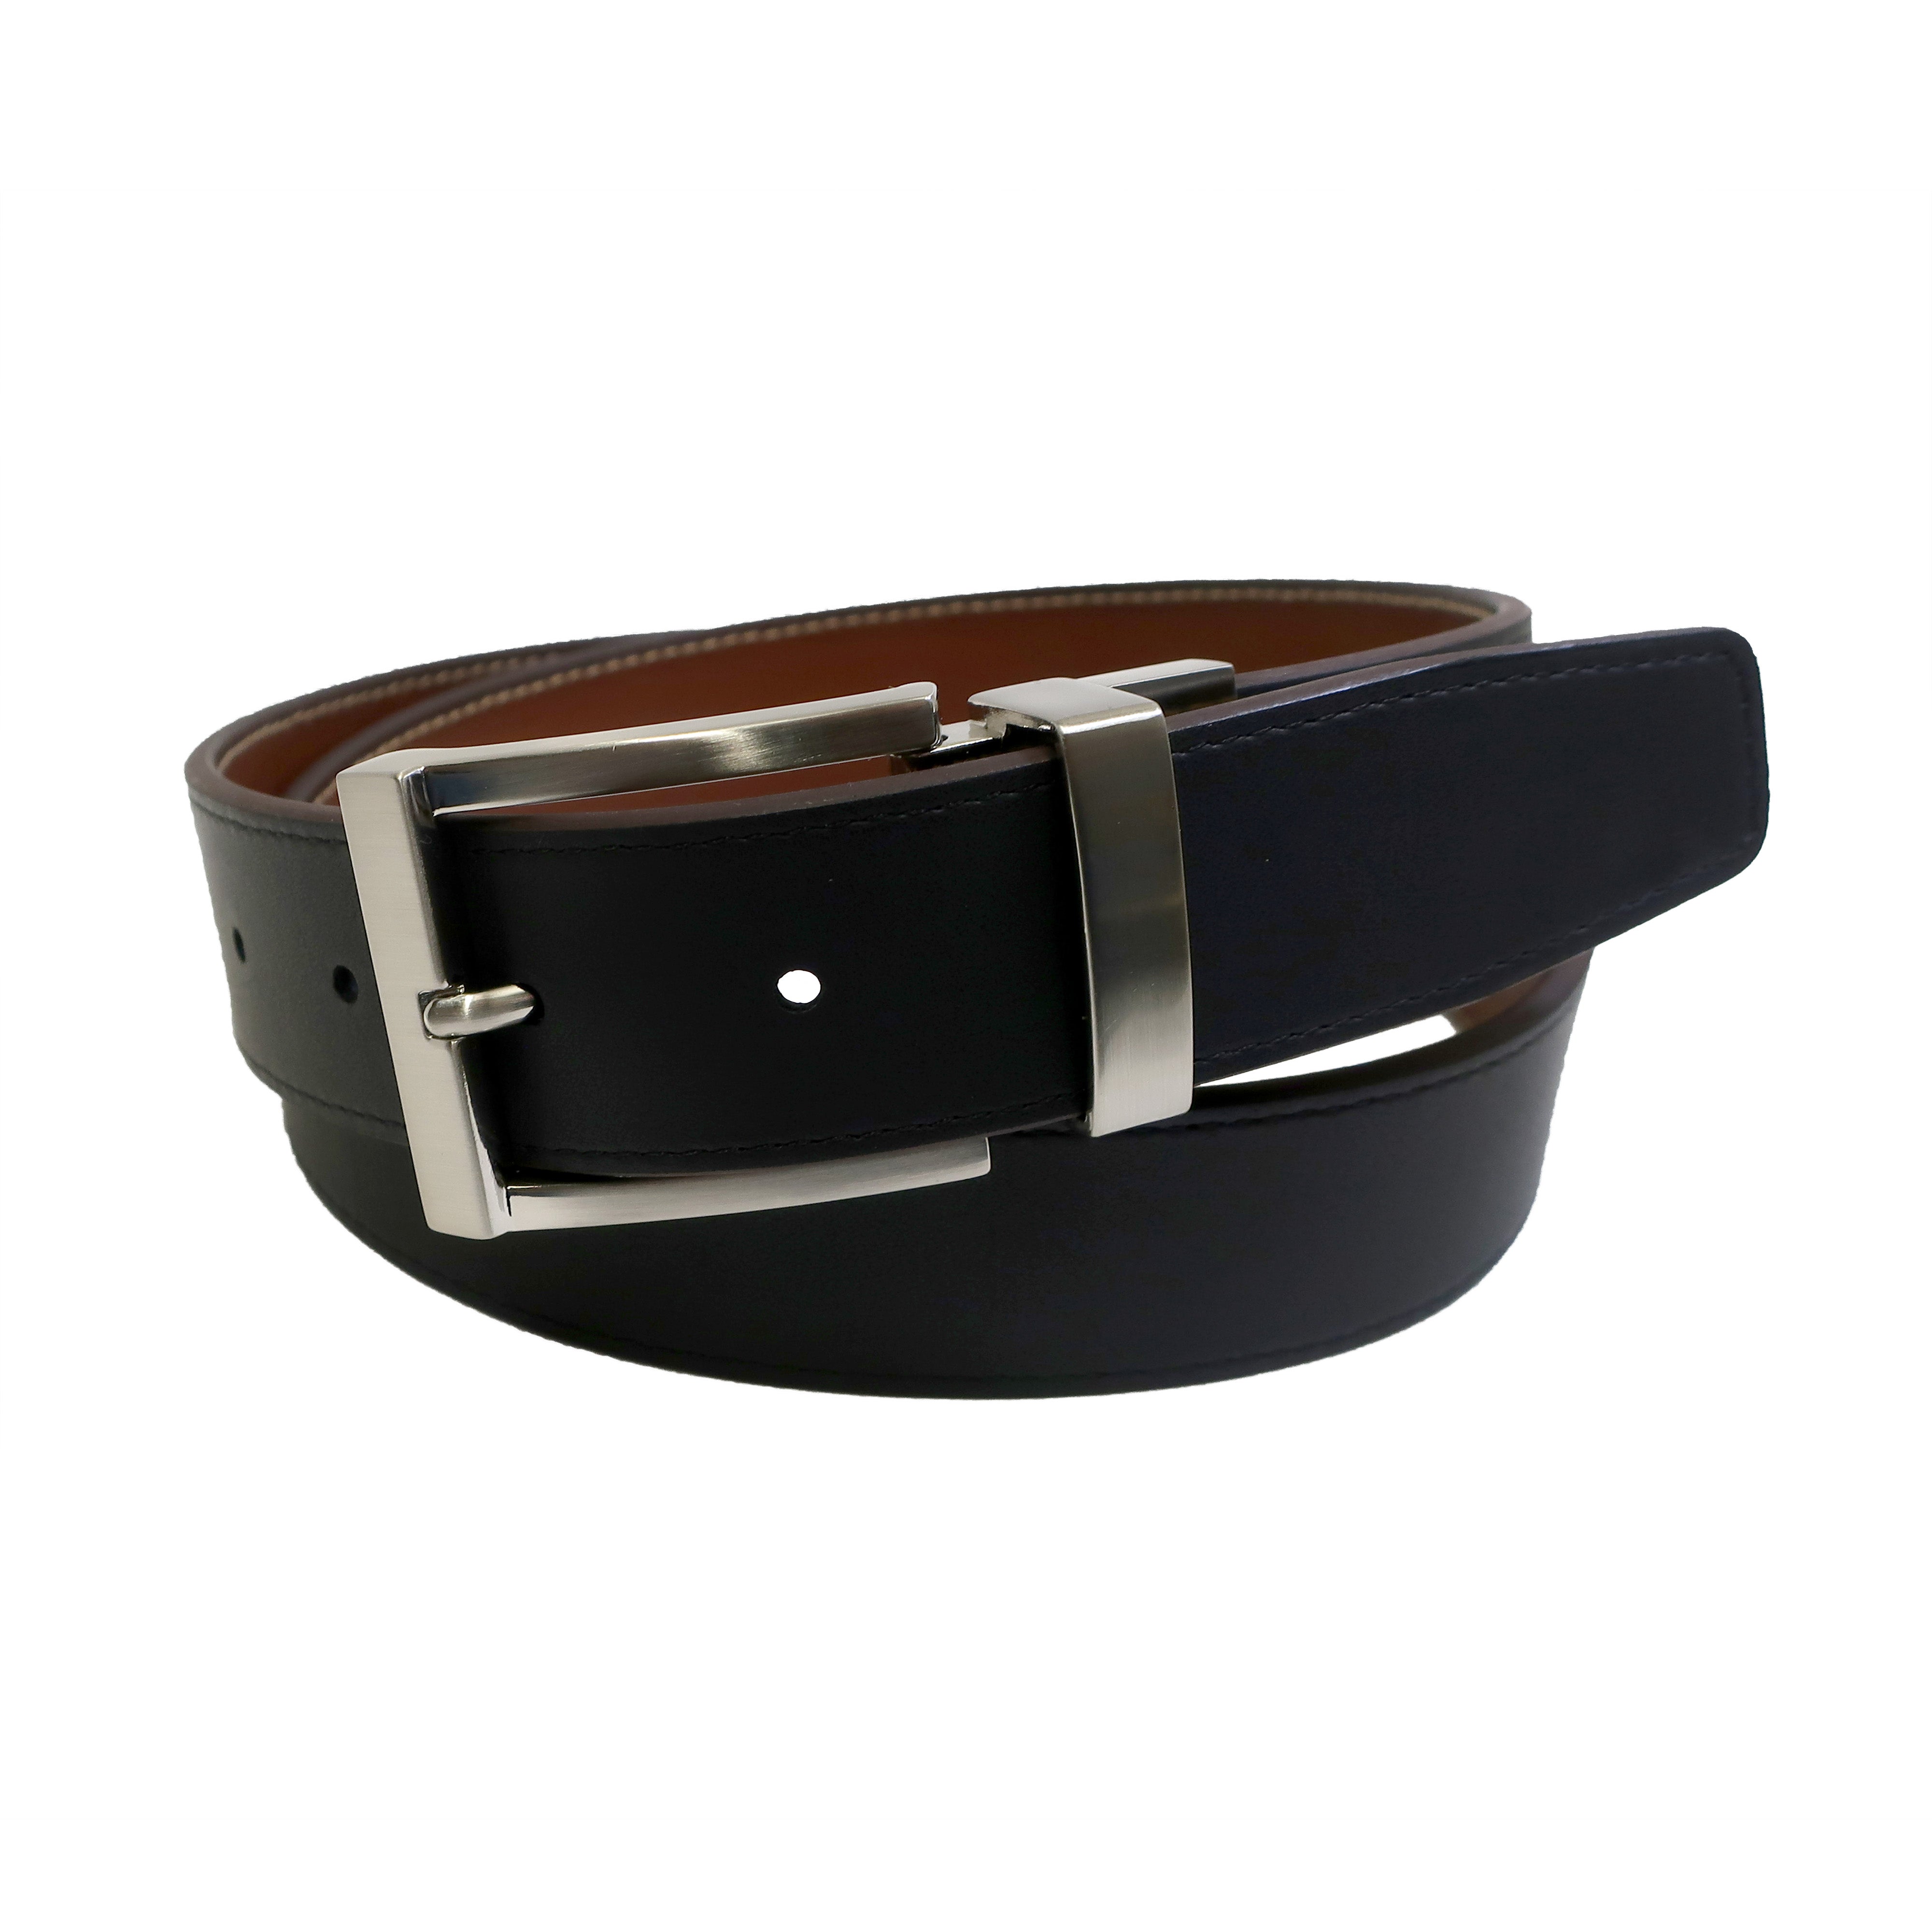 Closed view leather reversible belt, black